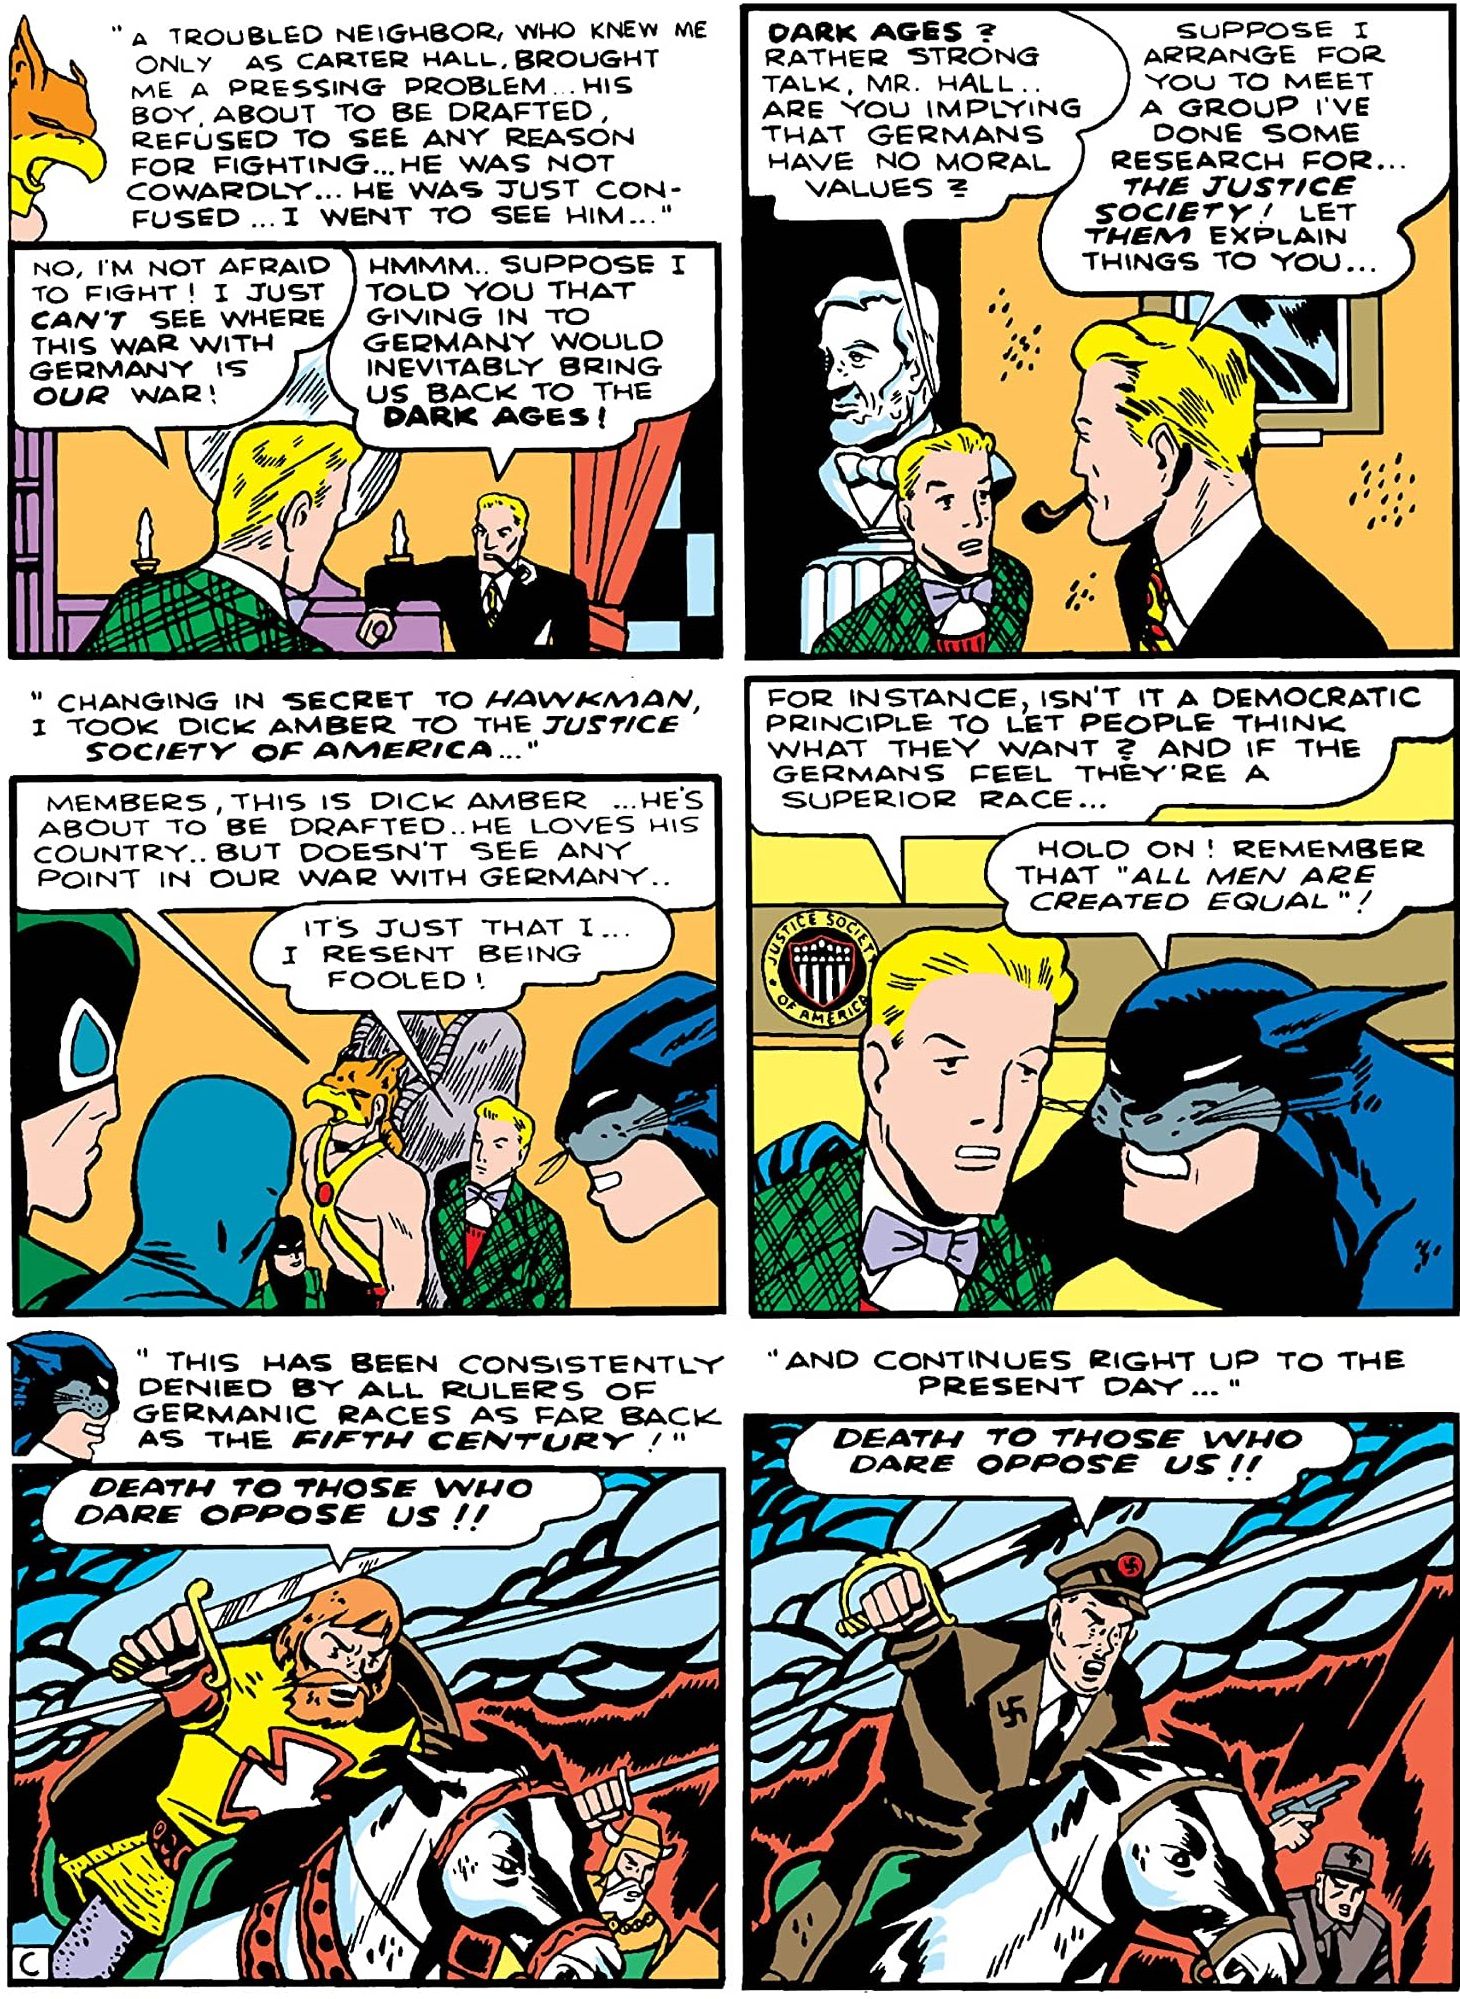 Justice Society explains the inherent evils of Germany to a young man